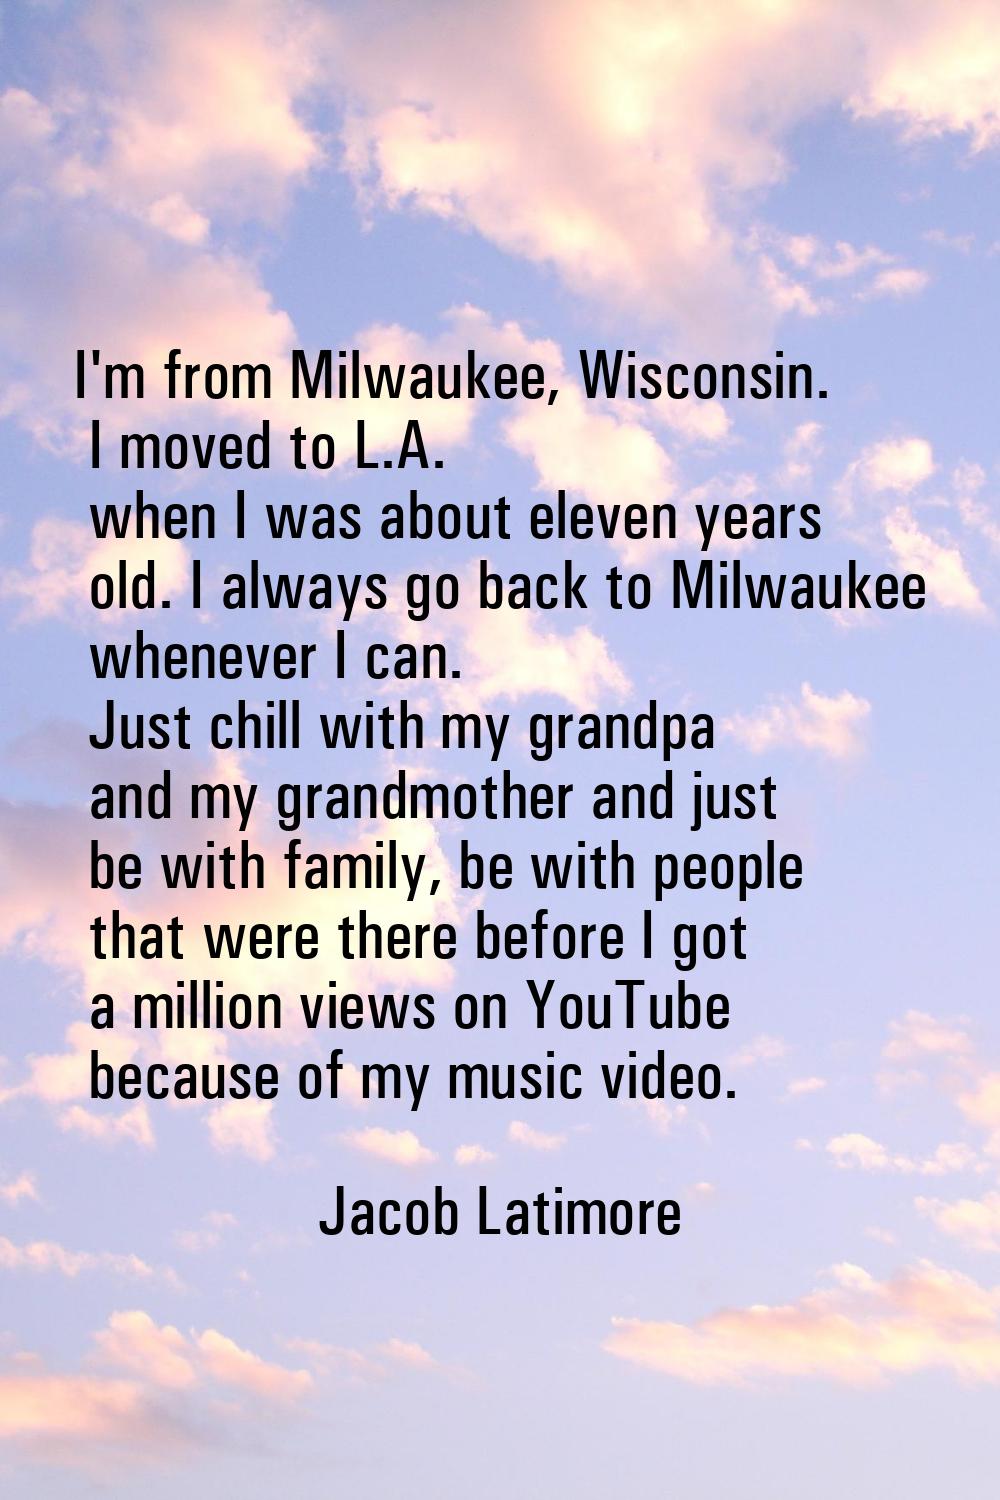 I'm from Milwaukee, Wisconsin. I moved to L.A. when I was about eleven years old. I always go back 